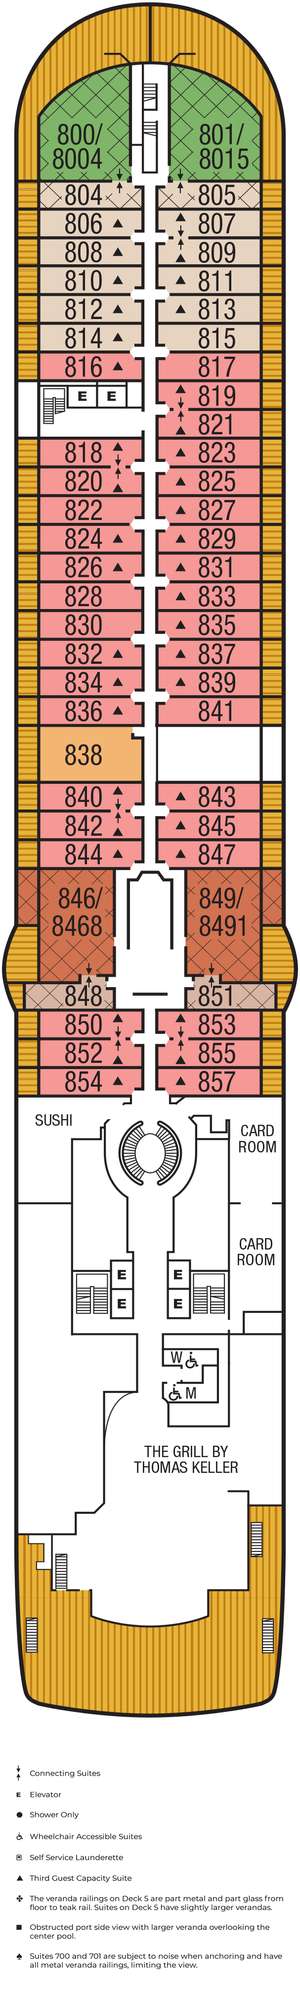 Deck plan for Seabourn Encore